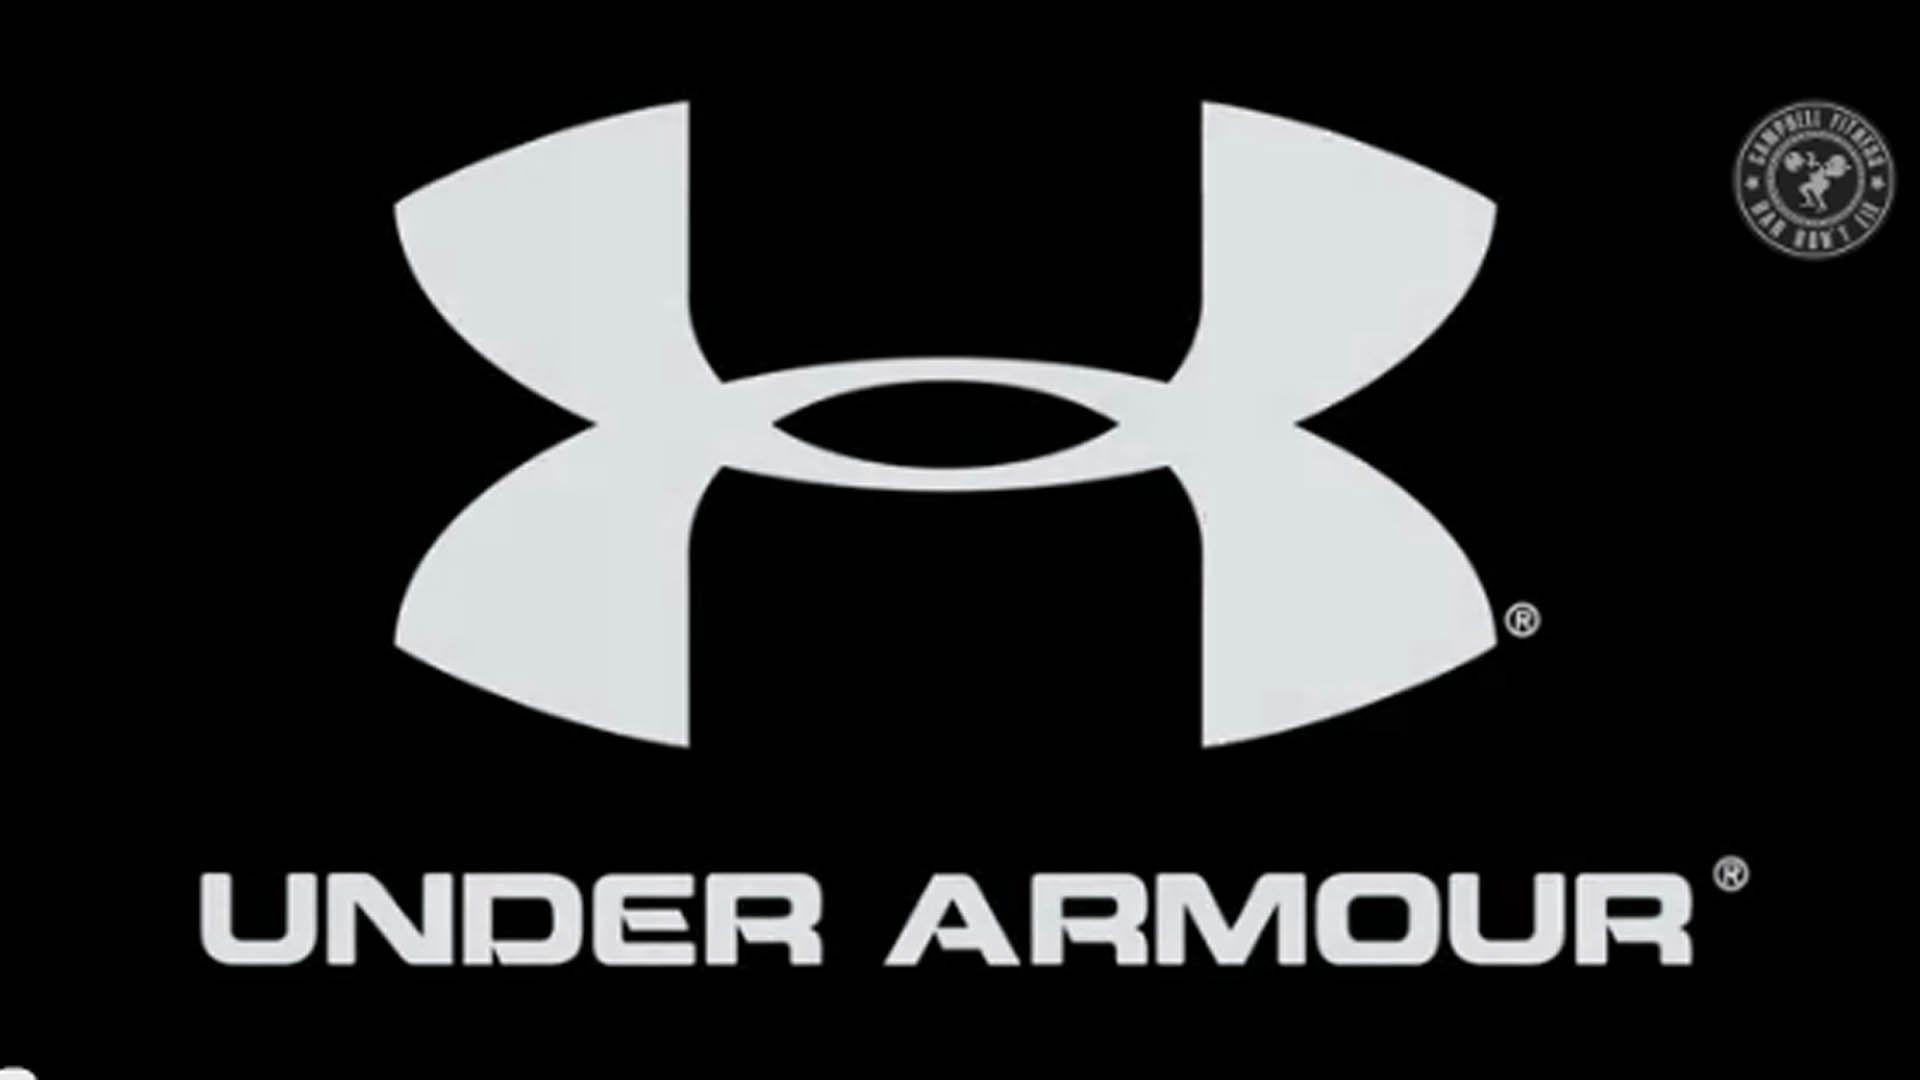 1920x1080 Under Armour Wallpapers HD | HD Wallpapers, Backgrounds, Images .